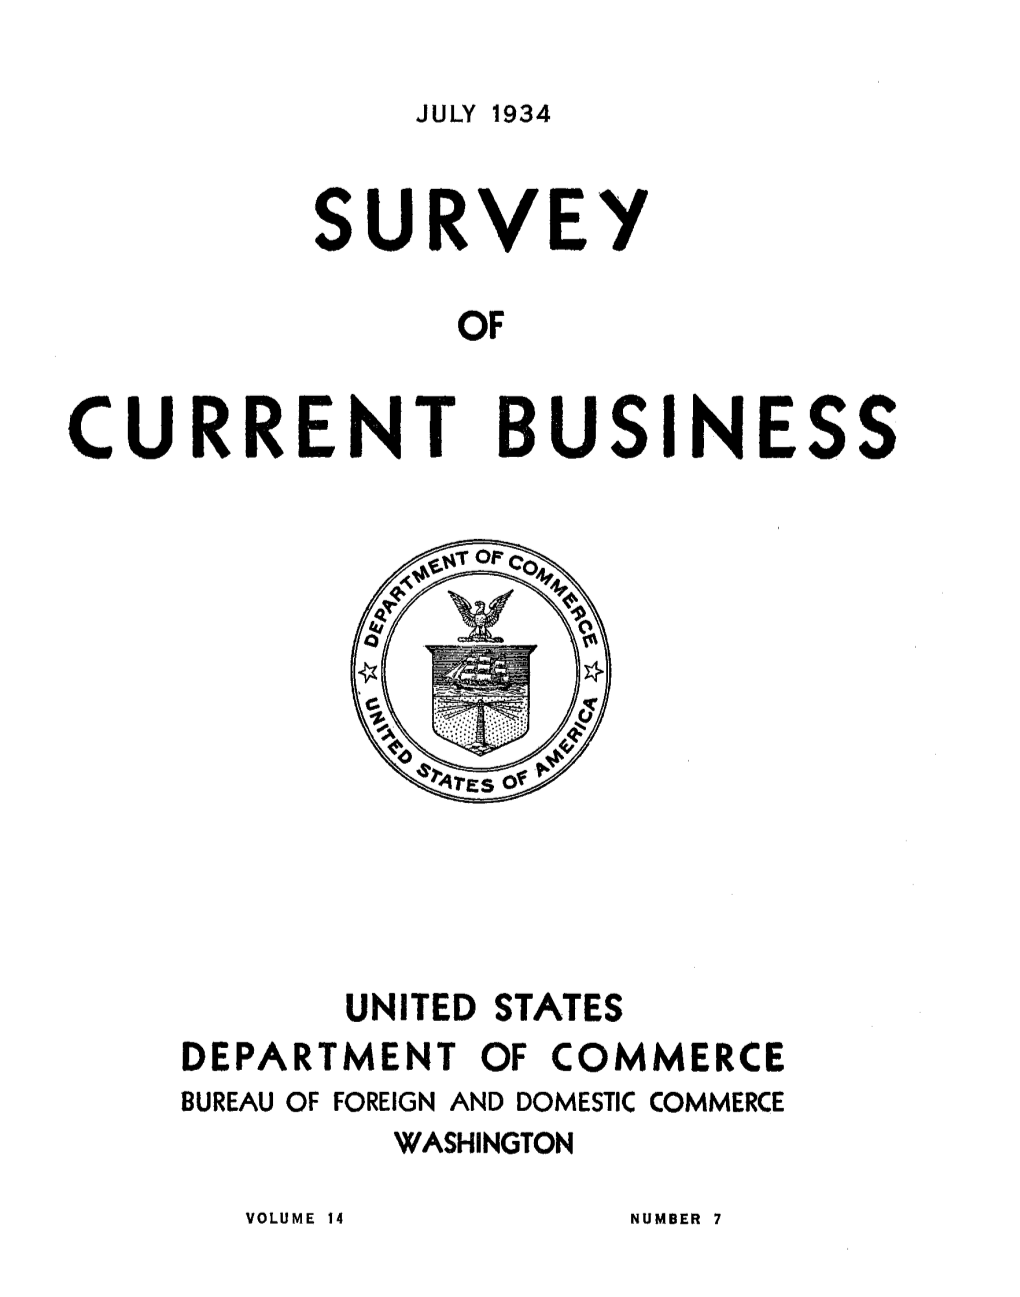 SURVEY of CURRENT BUSINESS July 1934